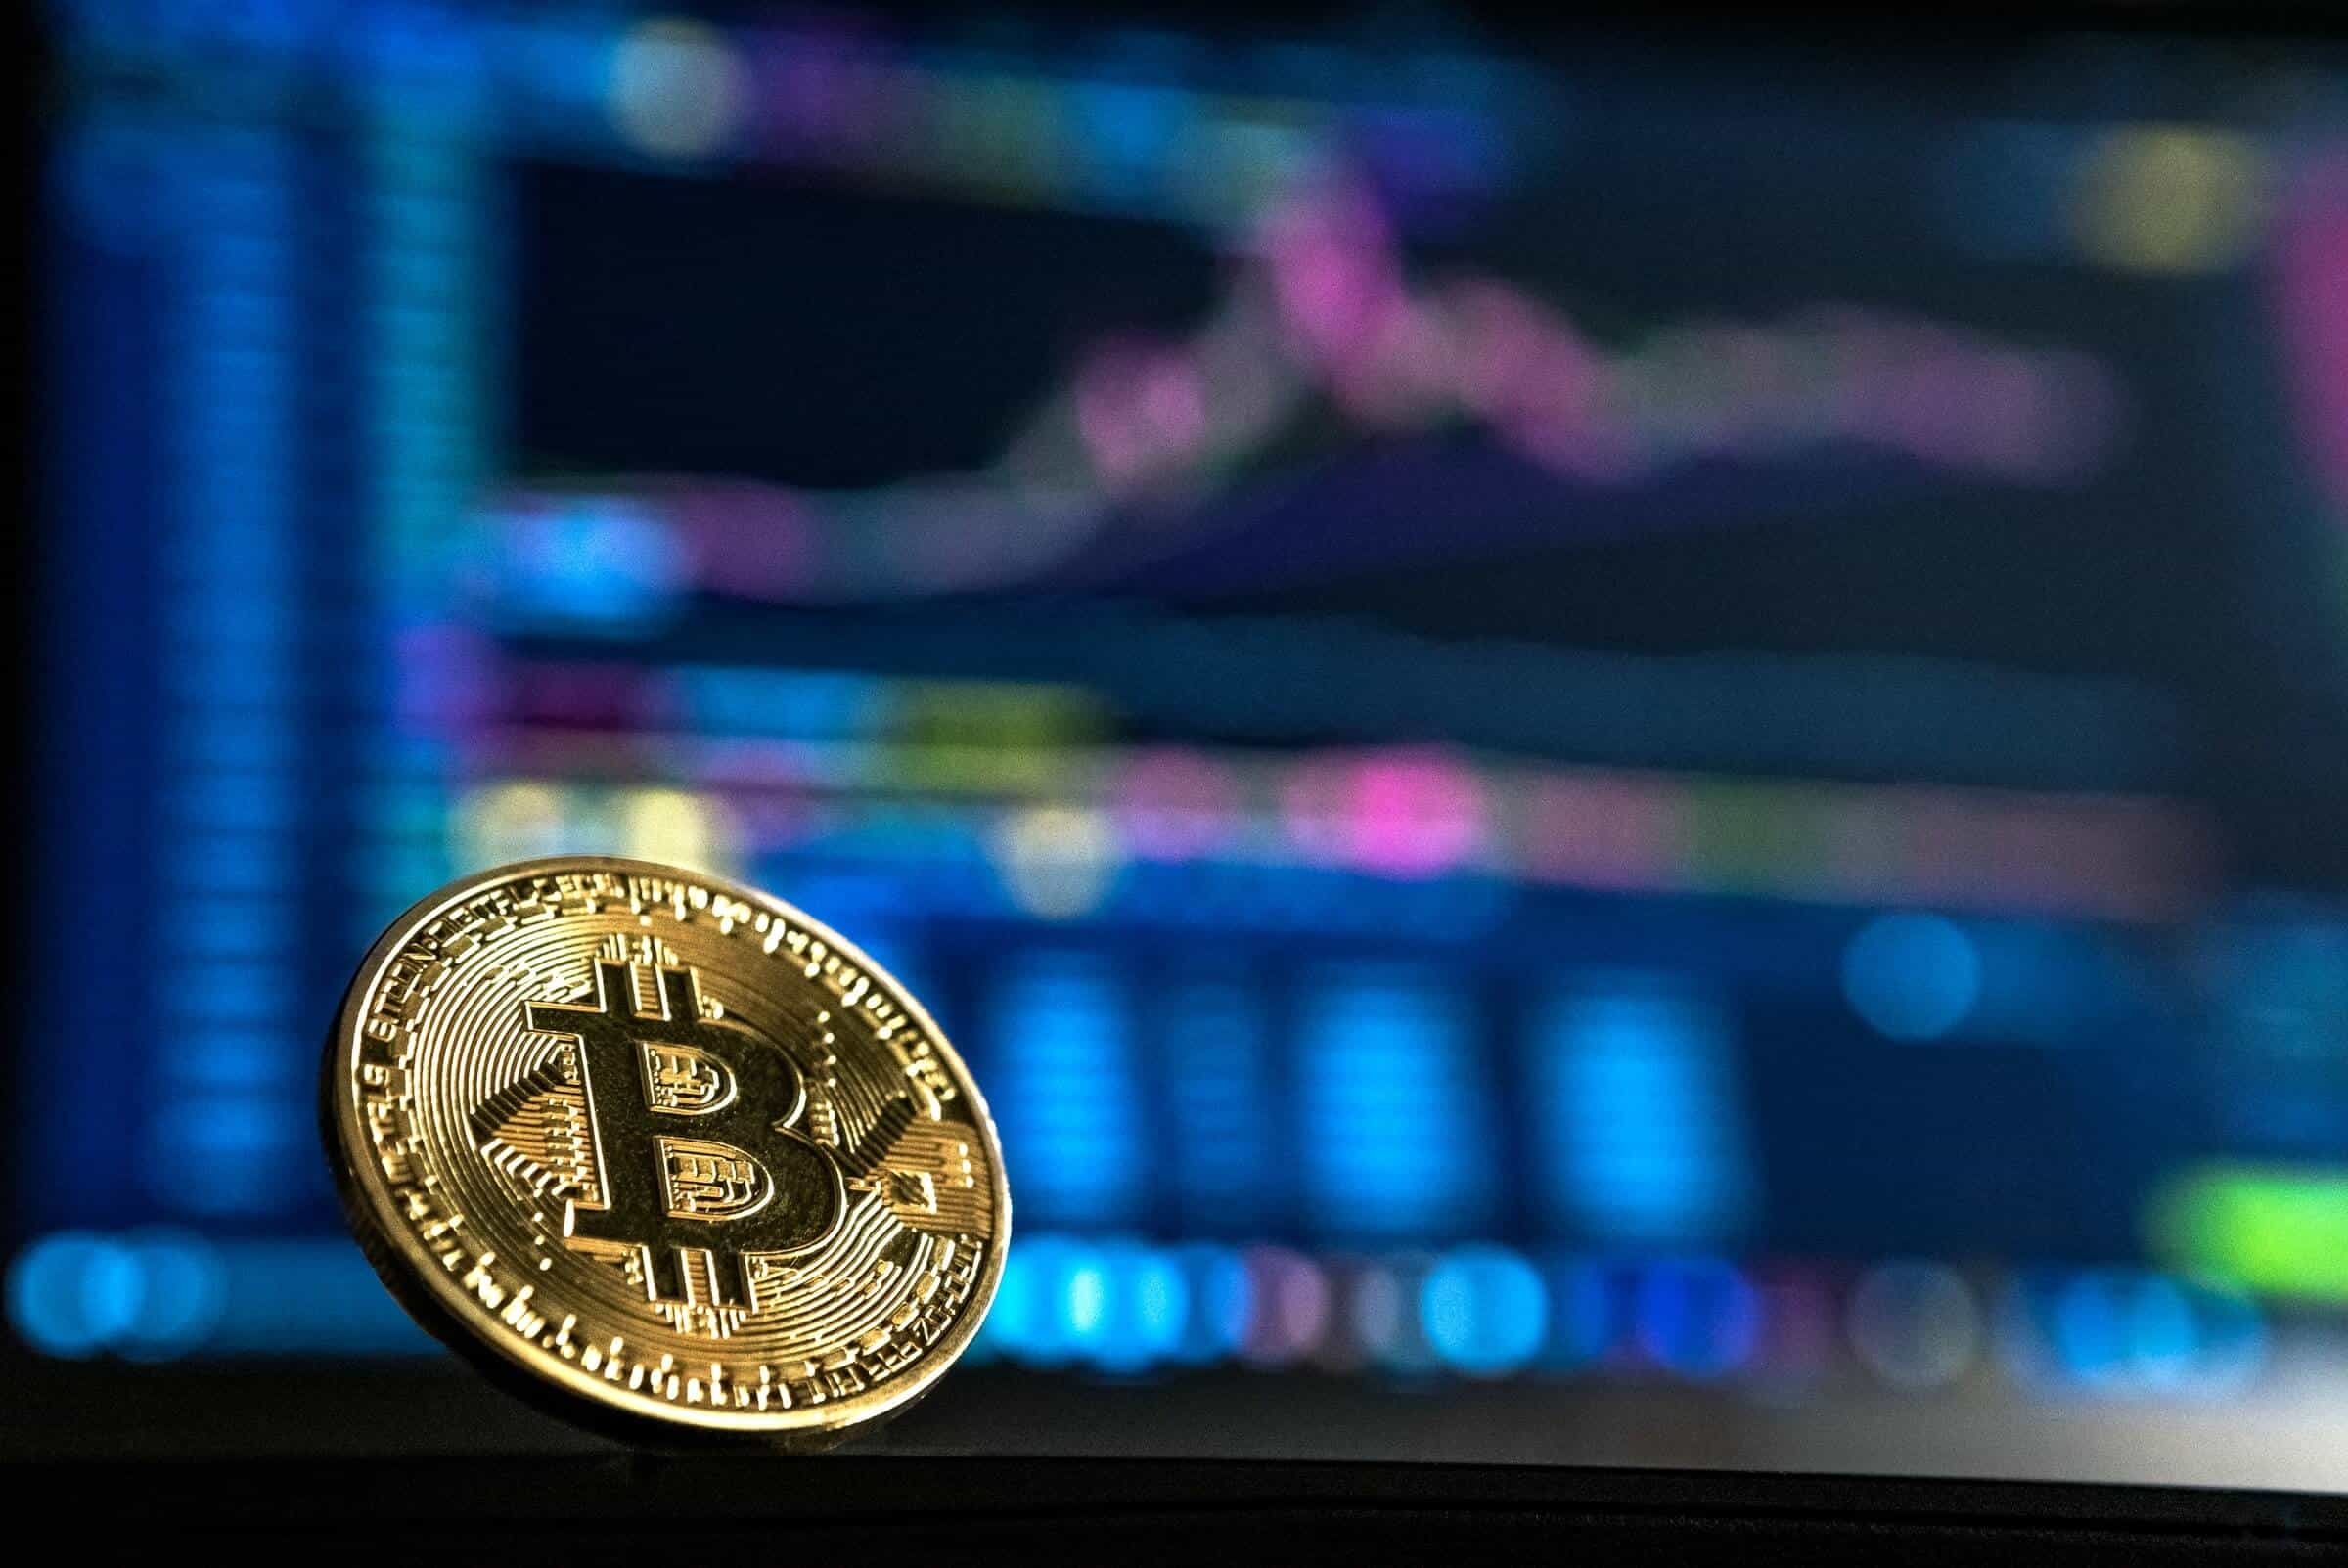 Shapeshift CEO Erik Voorhees Claims Bitcoin Price Could Go Up To $50K In A Year